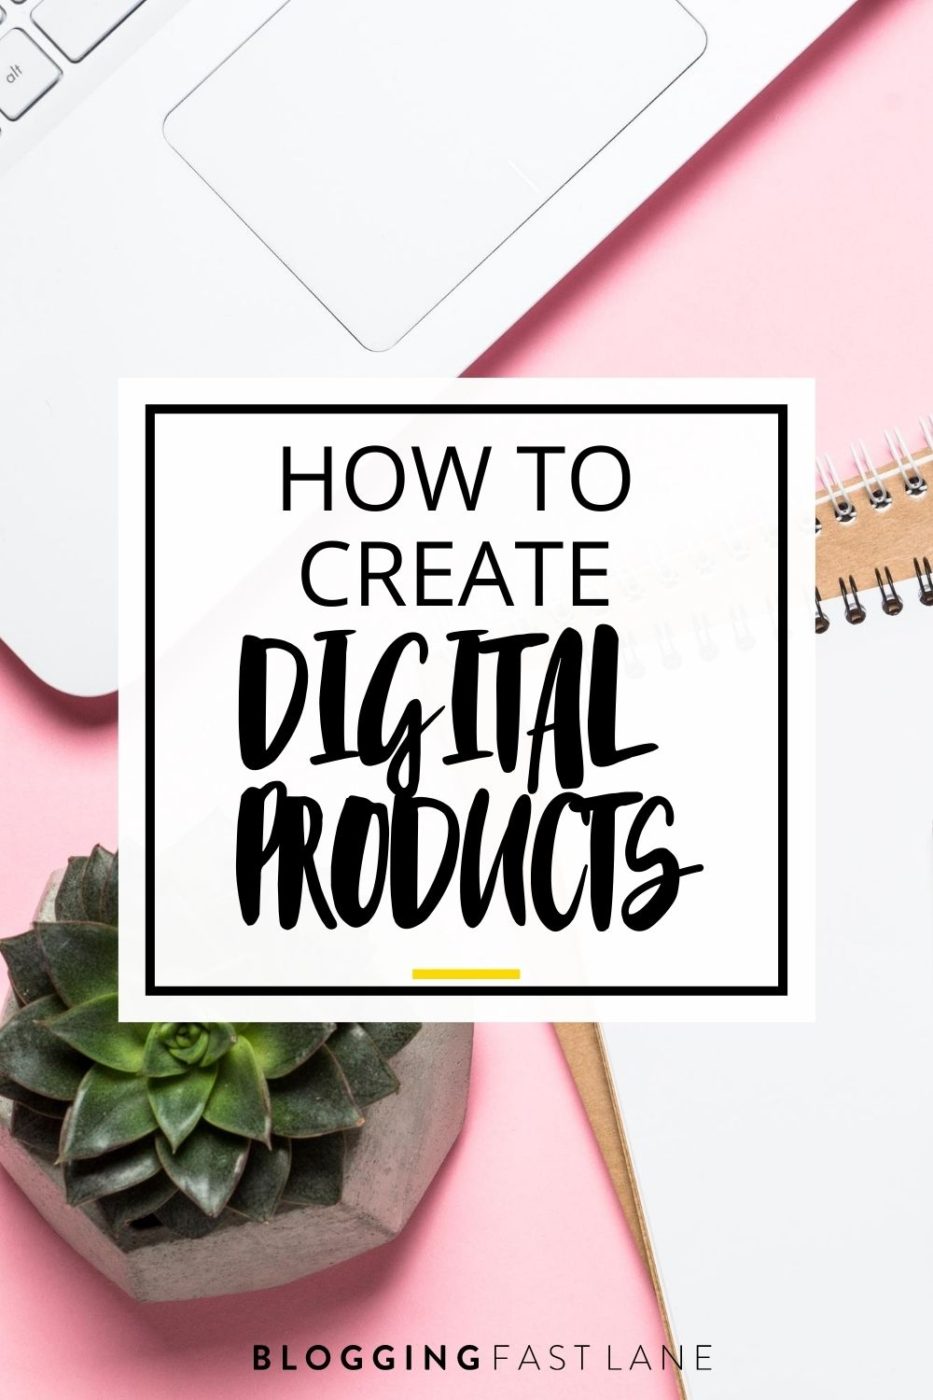 Digital Products | Are you a blogger wondering how to create digital products? Check out our complete guide to creating digital products + heaps of product examples!